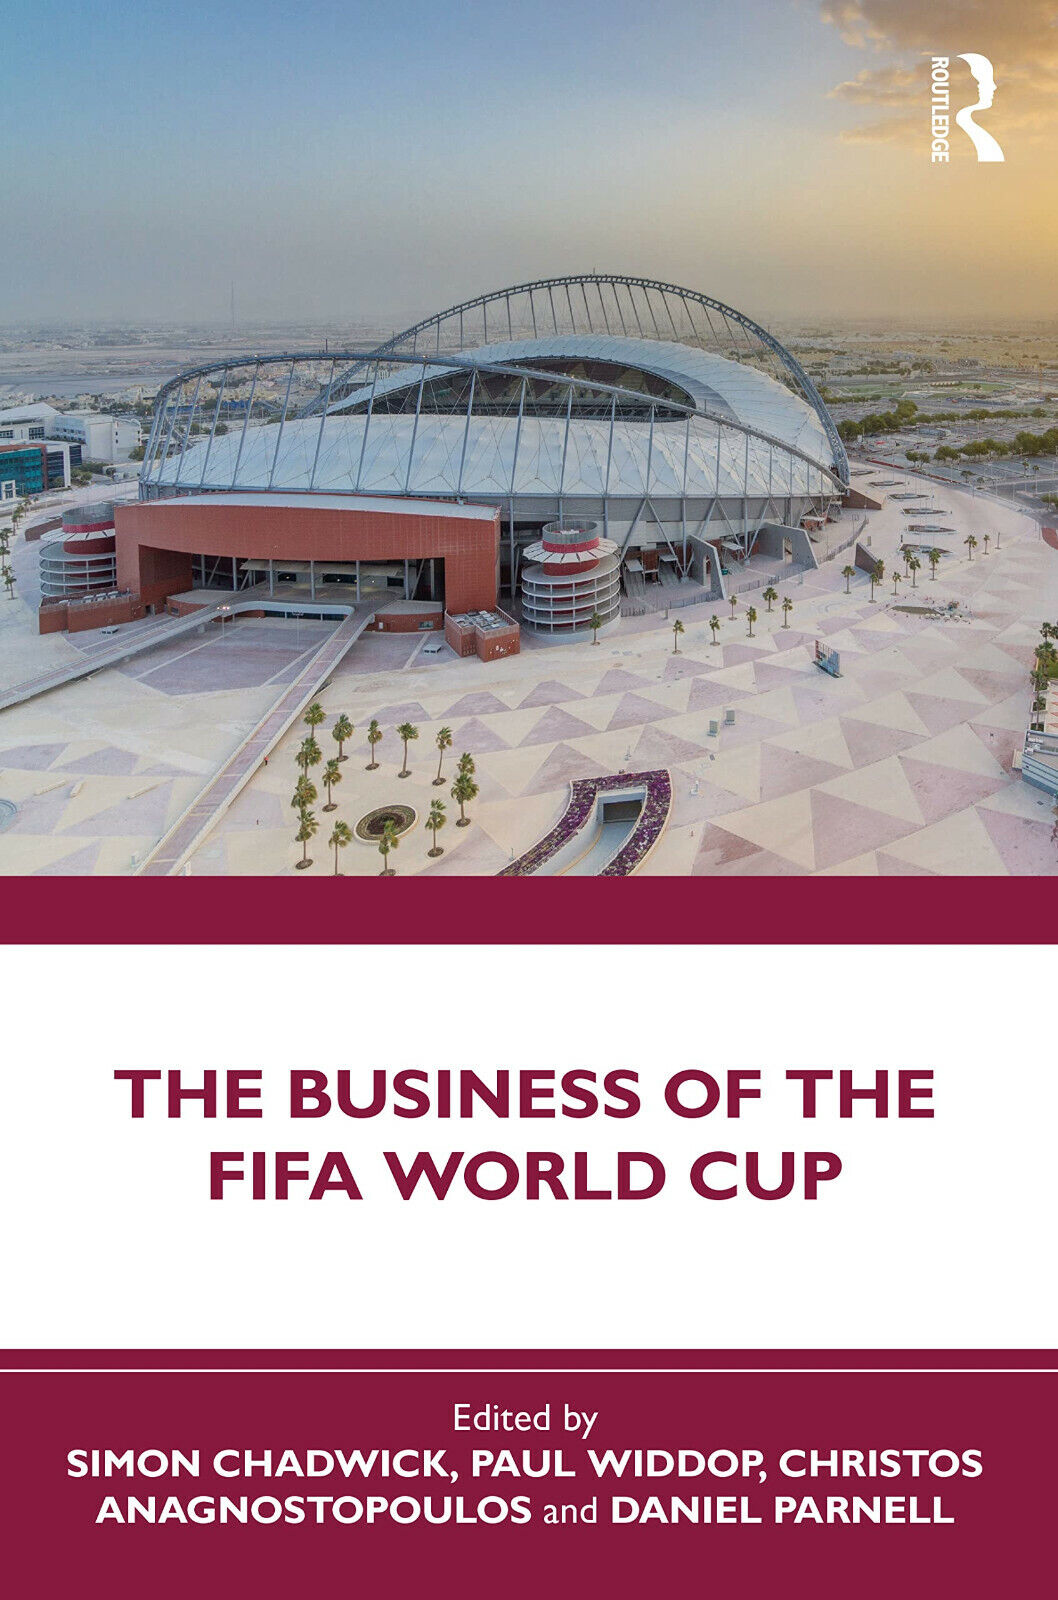 The Business of the FIFA World Cup - Routledge - 2022